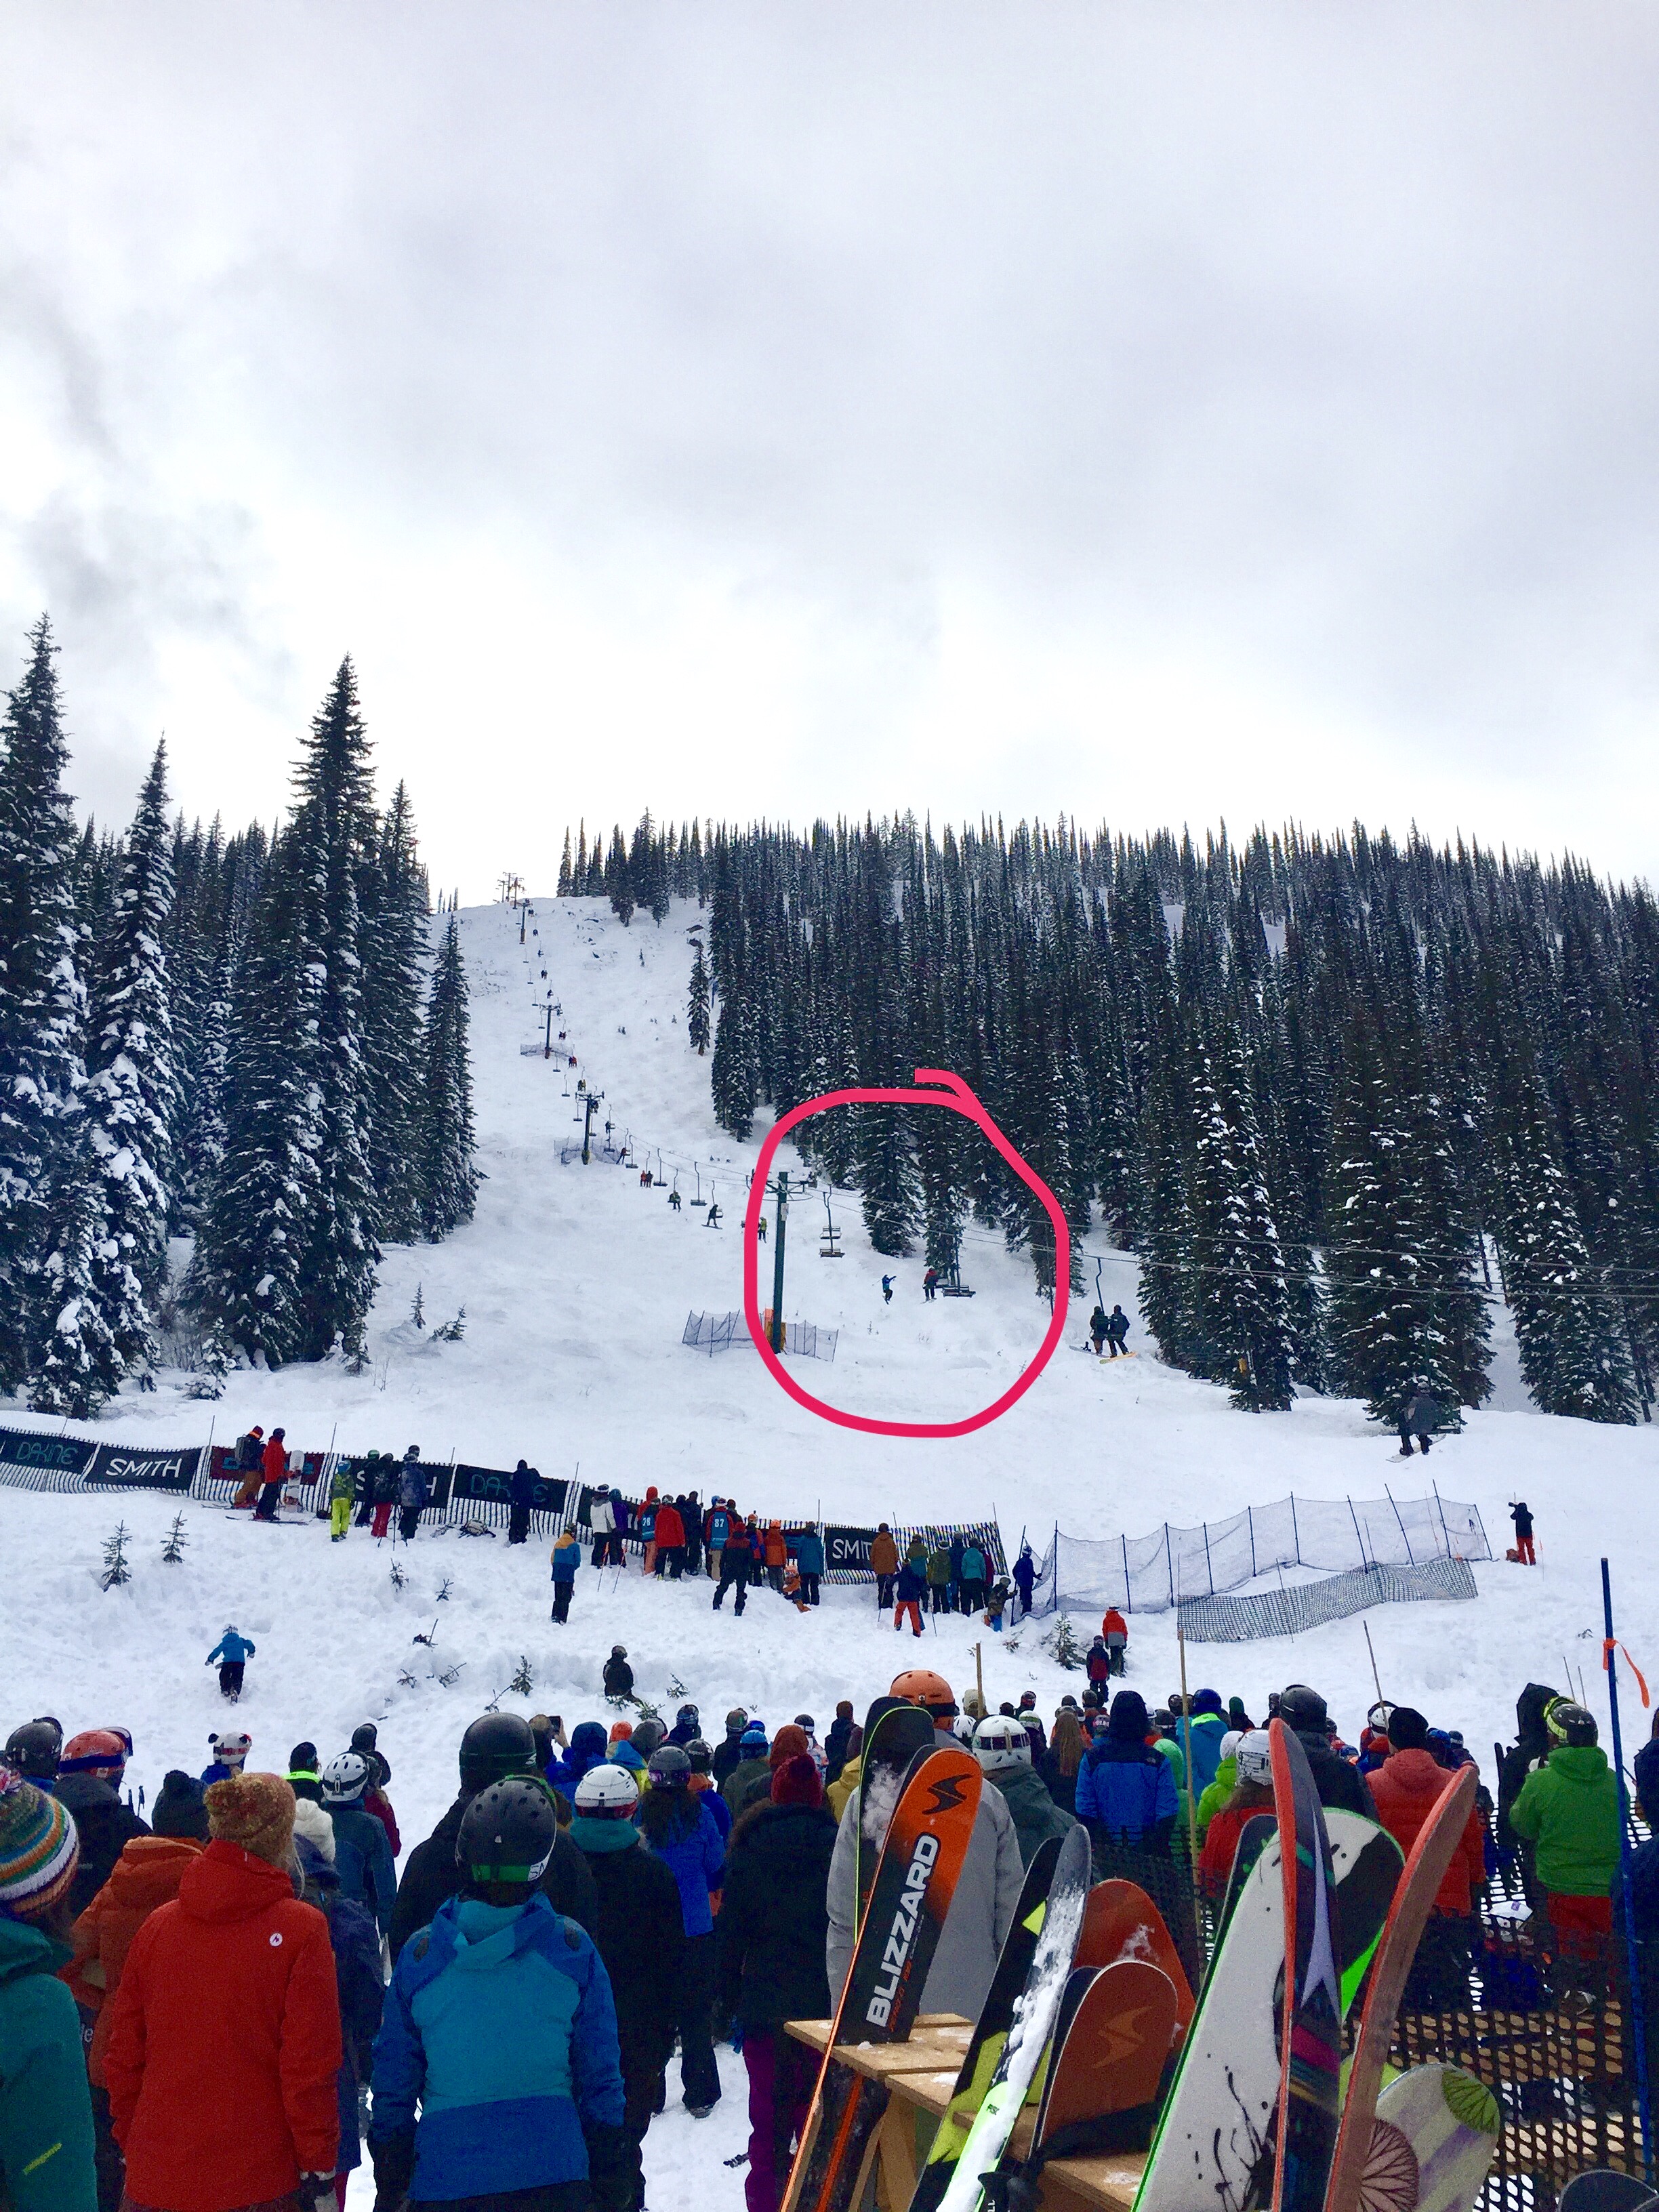 This young gun sent the triple cliff towards the top of the run, 360'd the road gap and the went massive almost hitting the chairs on the lift.